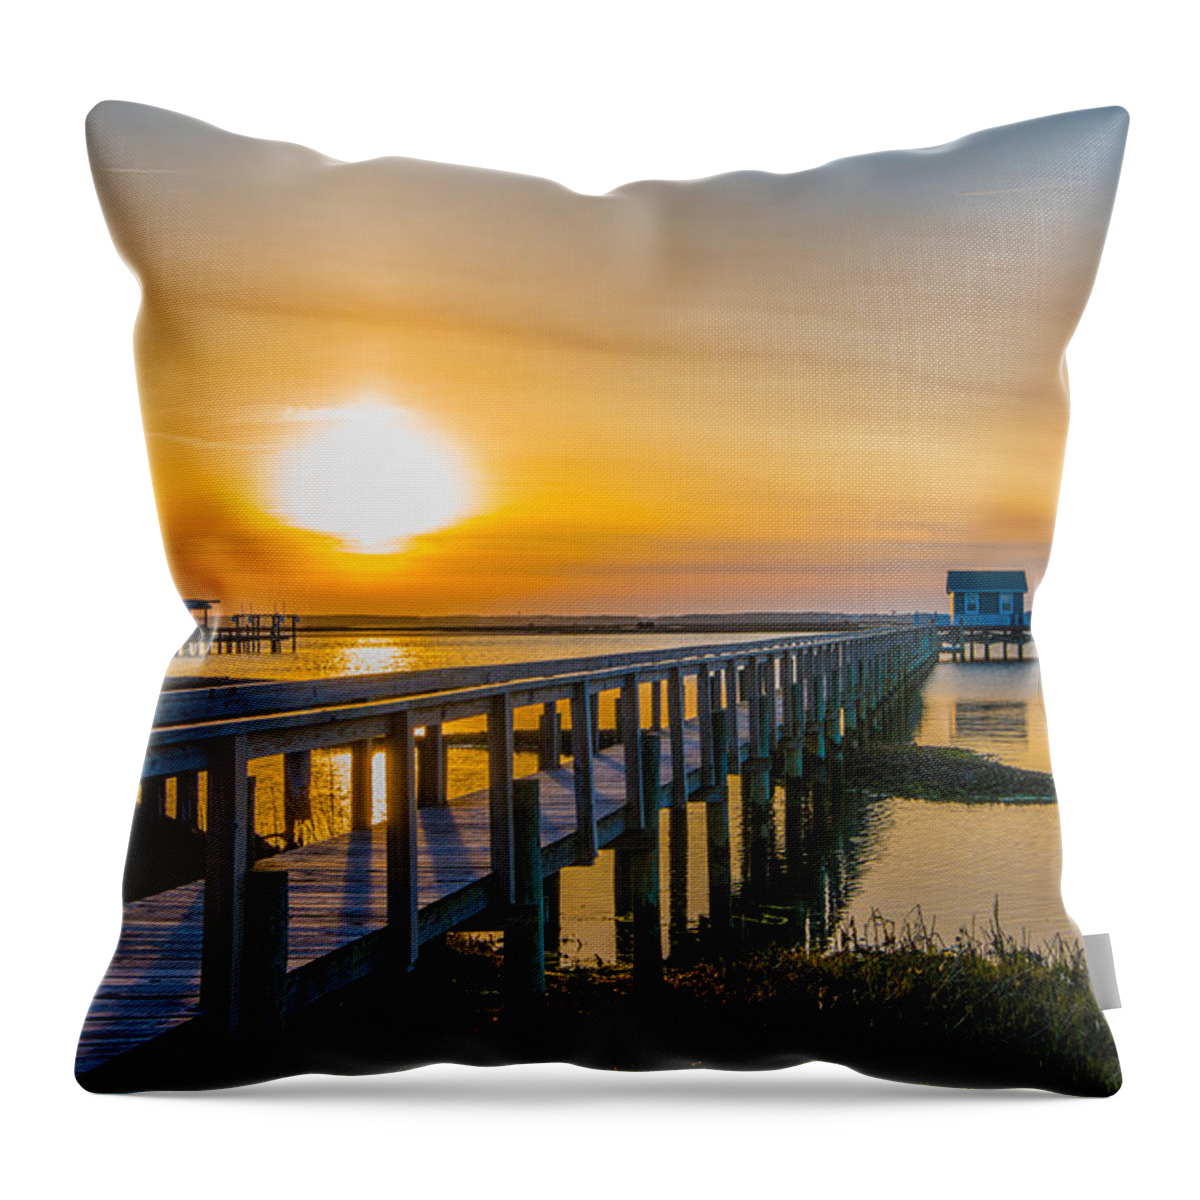 Dock Throw Pillow featuring the photograph Docks At Sunset I by Steven Ainsworth